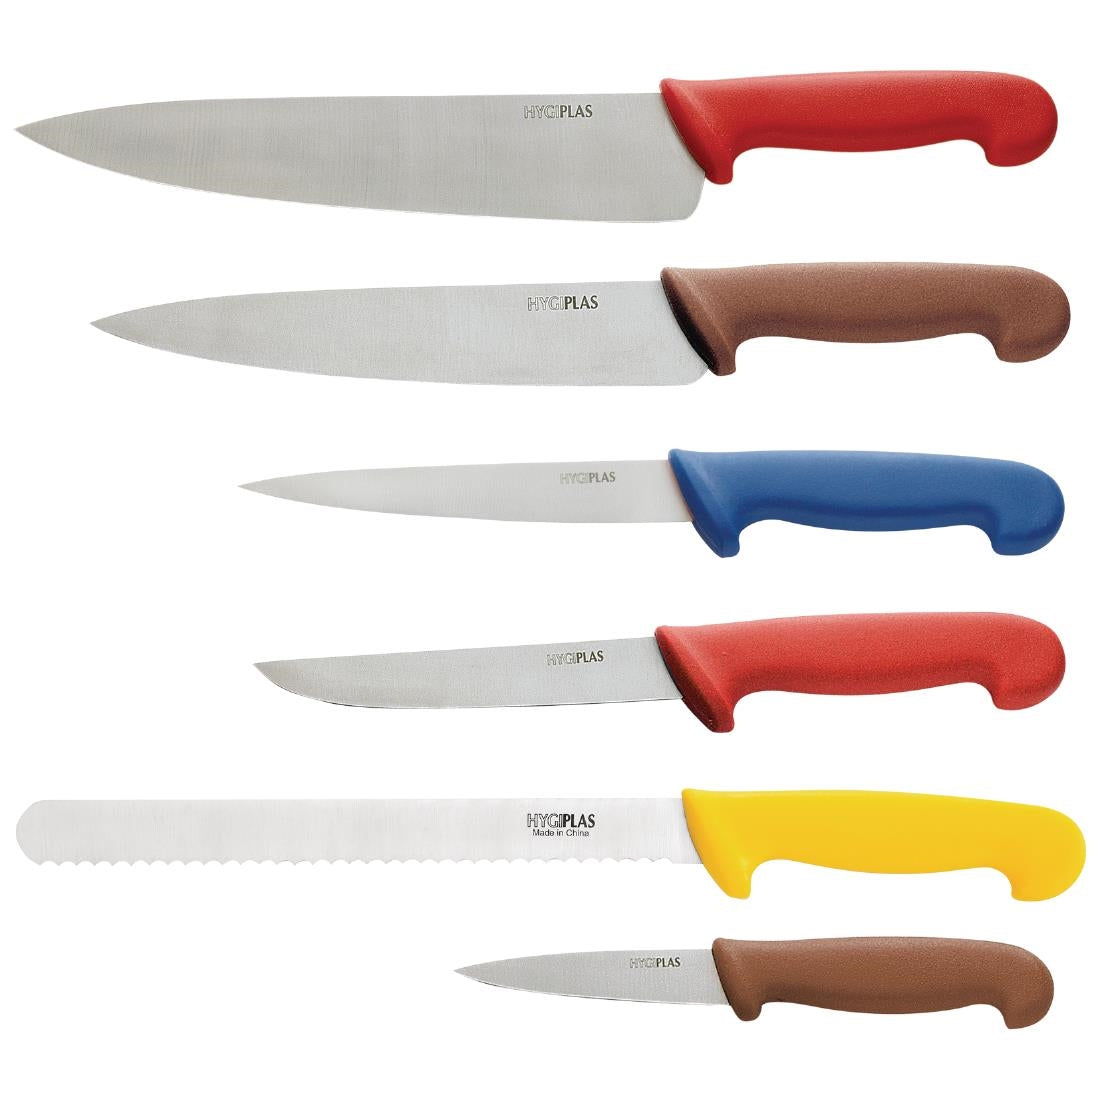 S088 Hygiplas Colour Coded Chefs Knife Set with Wallet